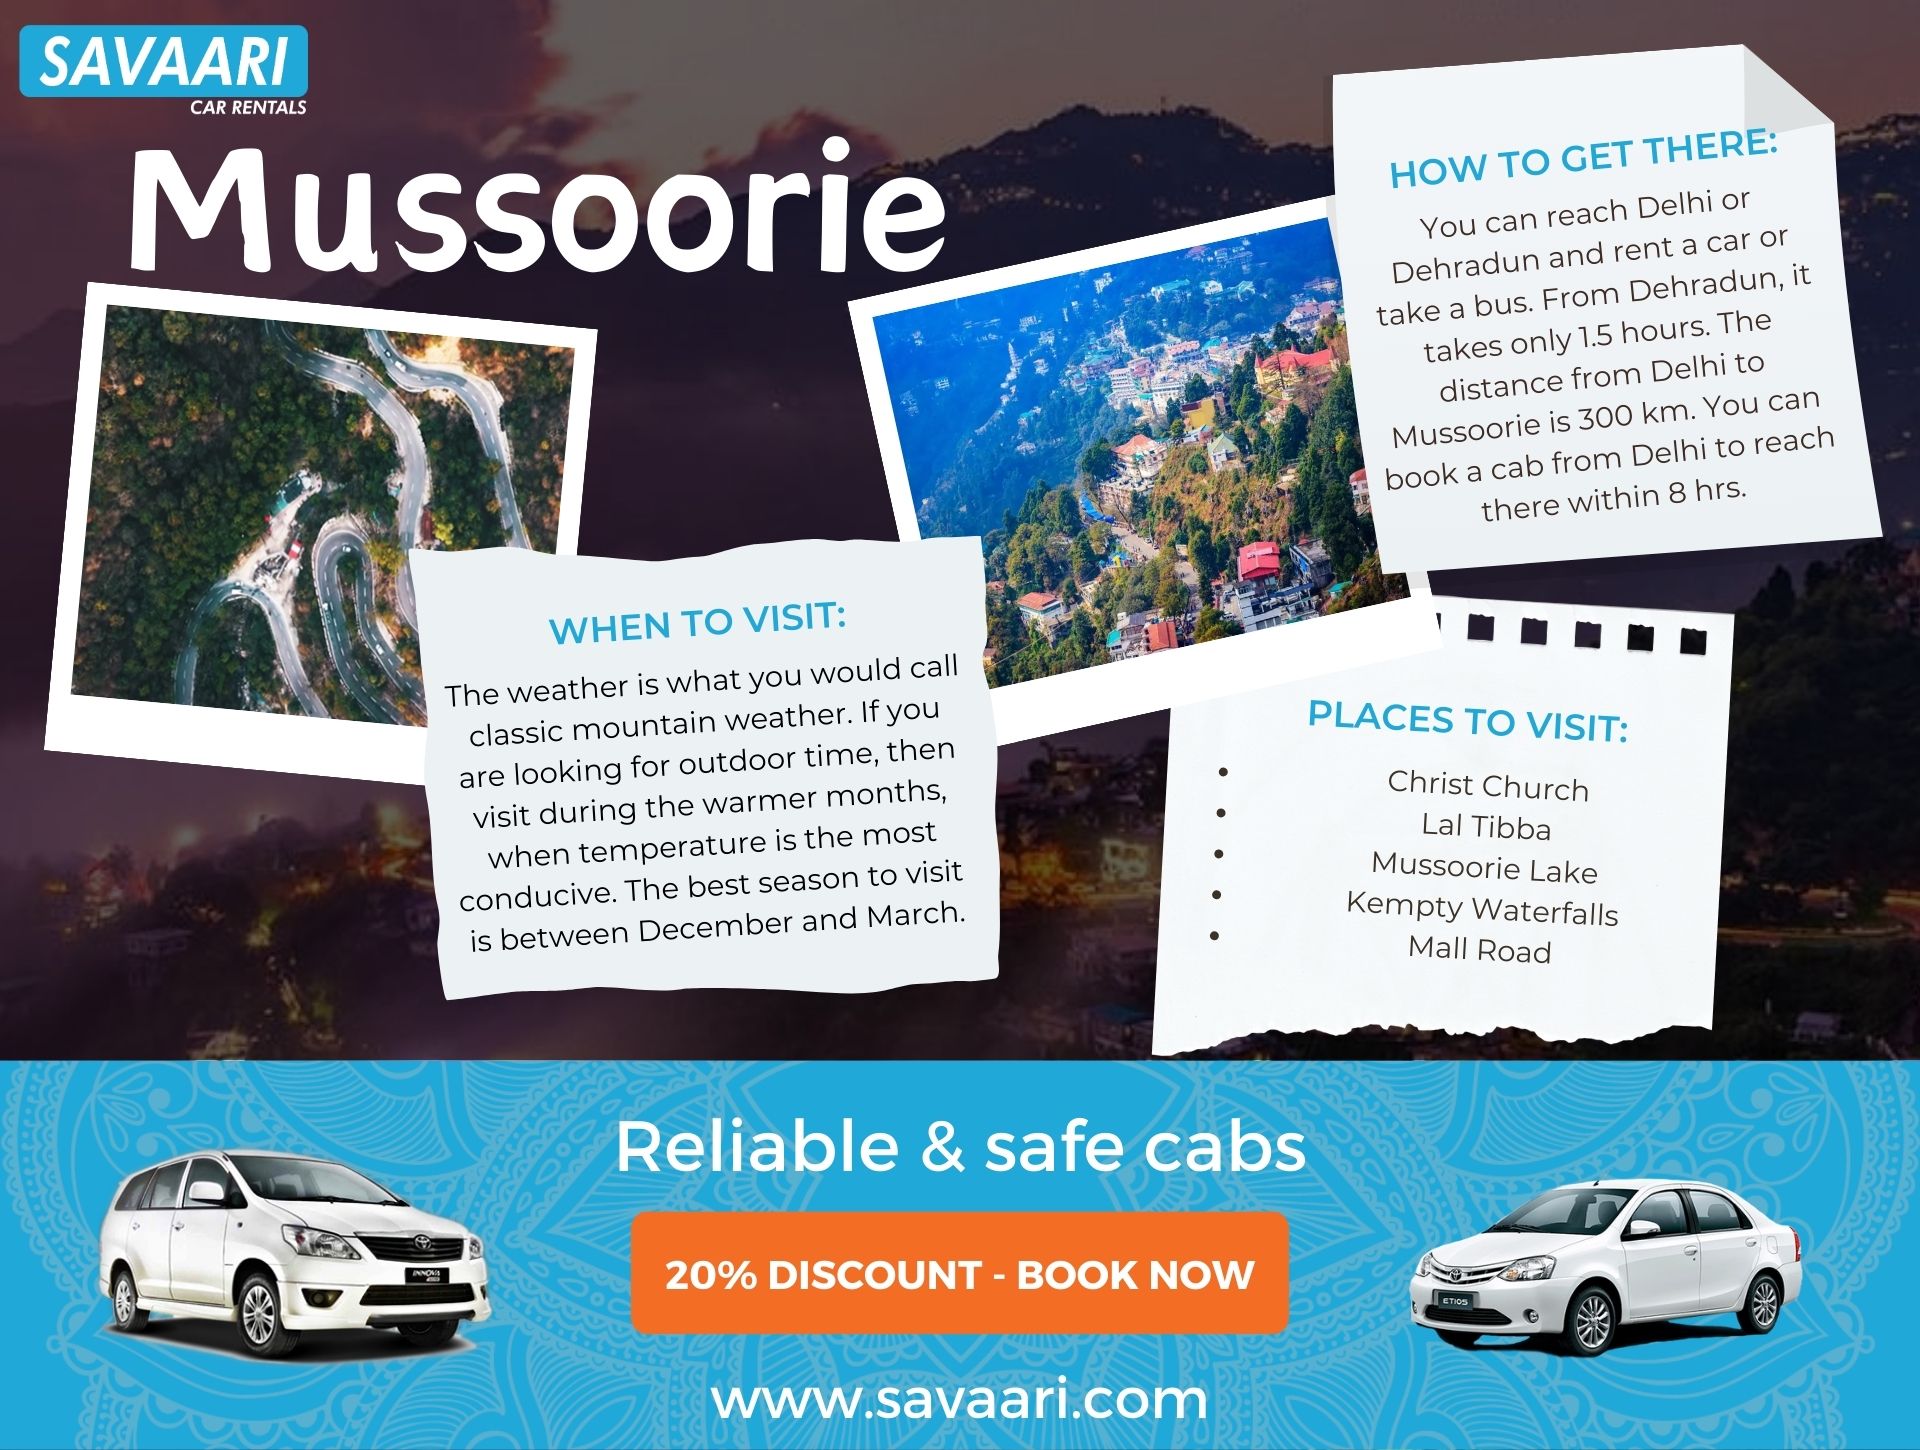 Things to do in Mussoorie